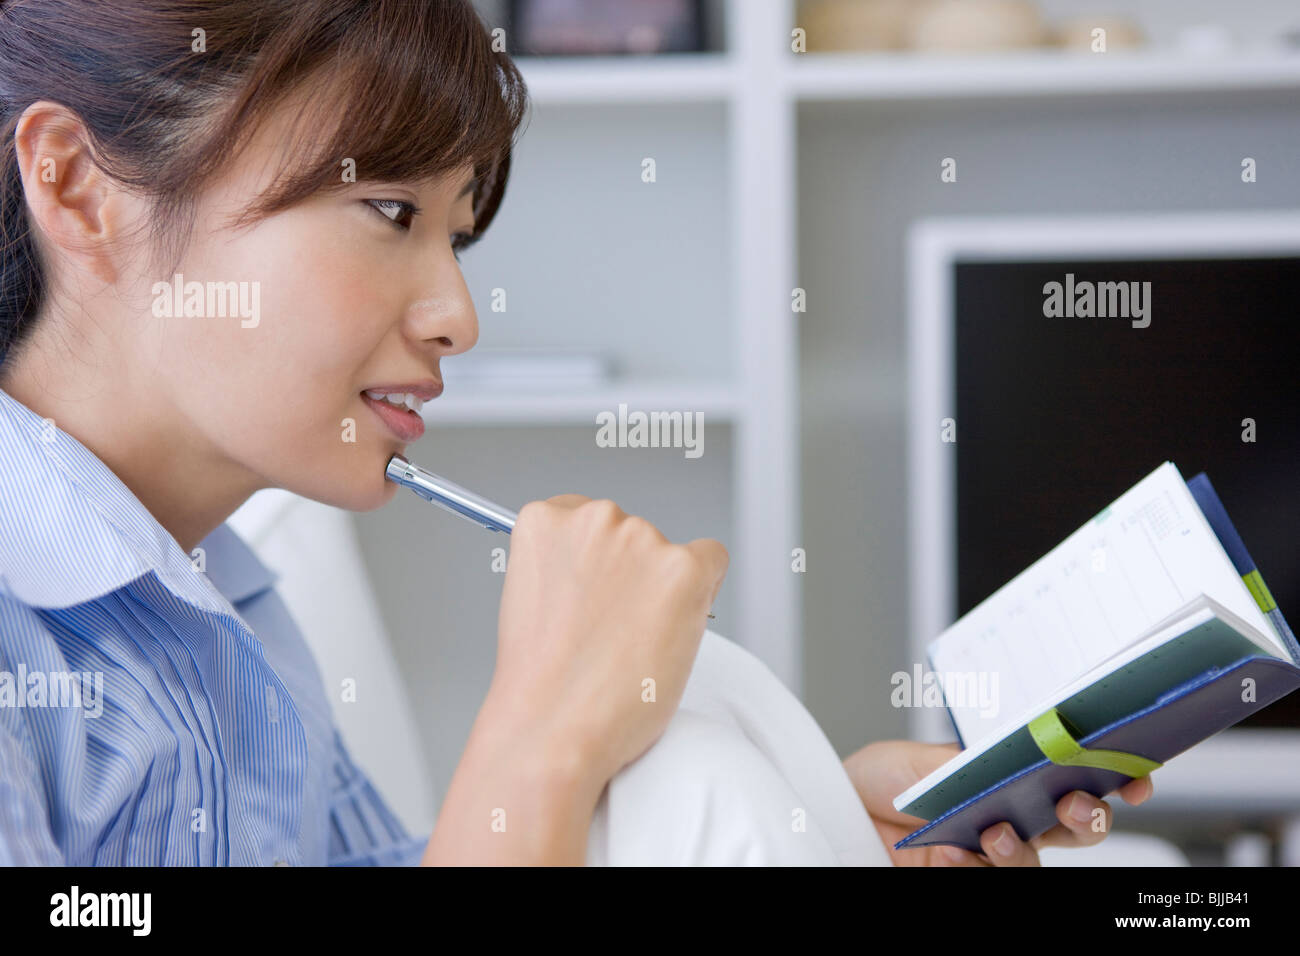 Young woman looking at personal organizer Stock Photo